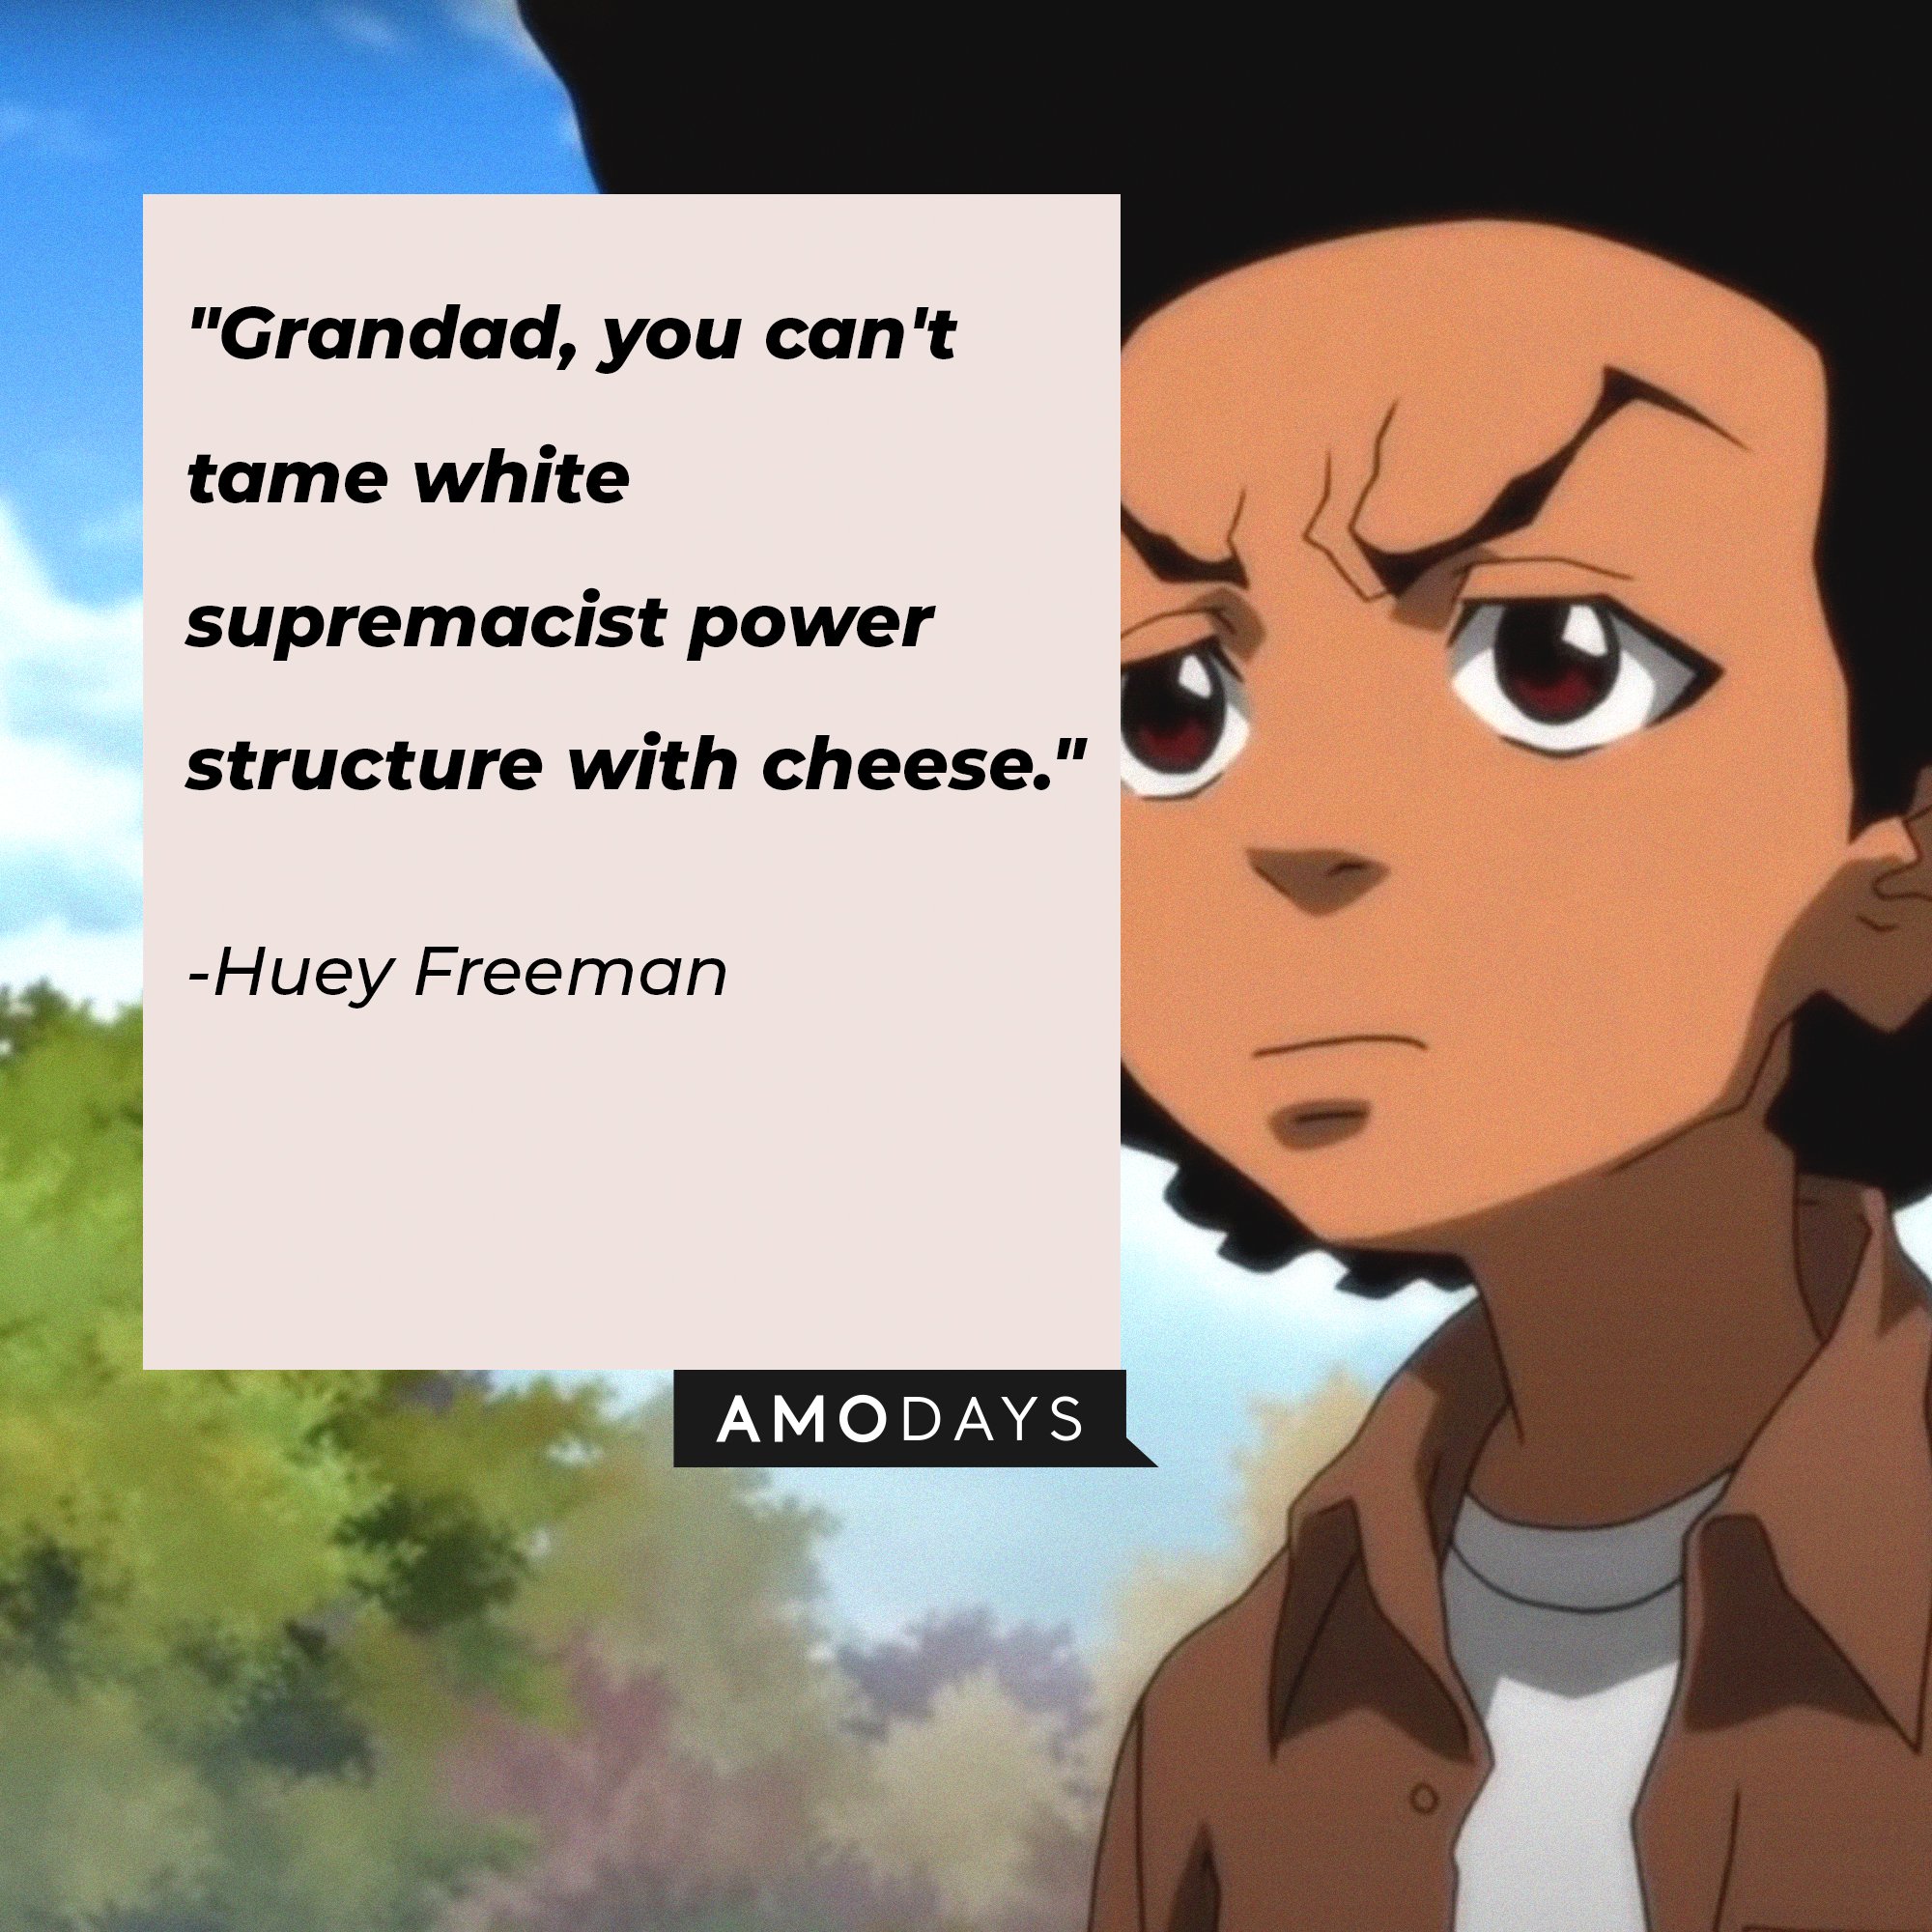 Huey Freeman’s quote: "Grandad, you can't tame white supremacist power structure with cheese." | Image: AmoDays